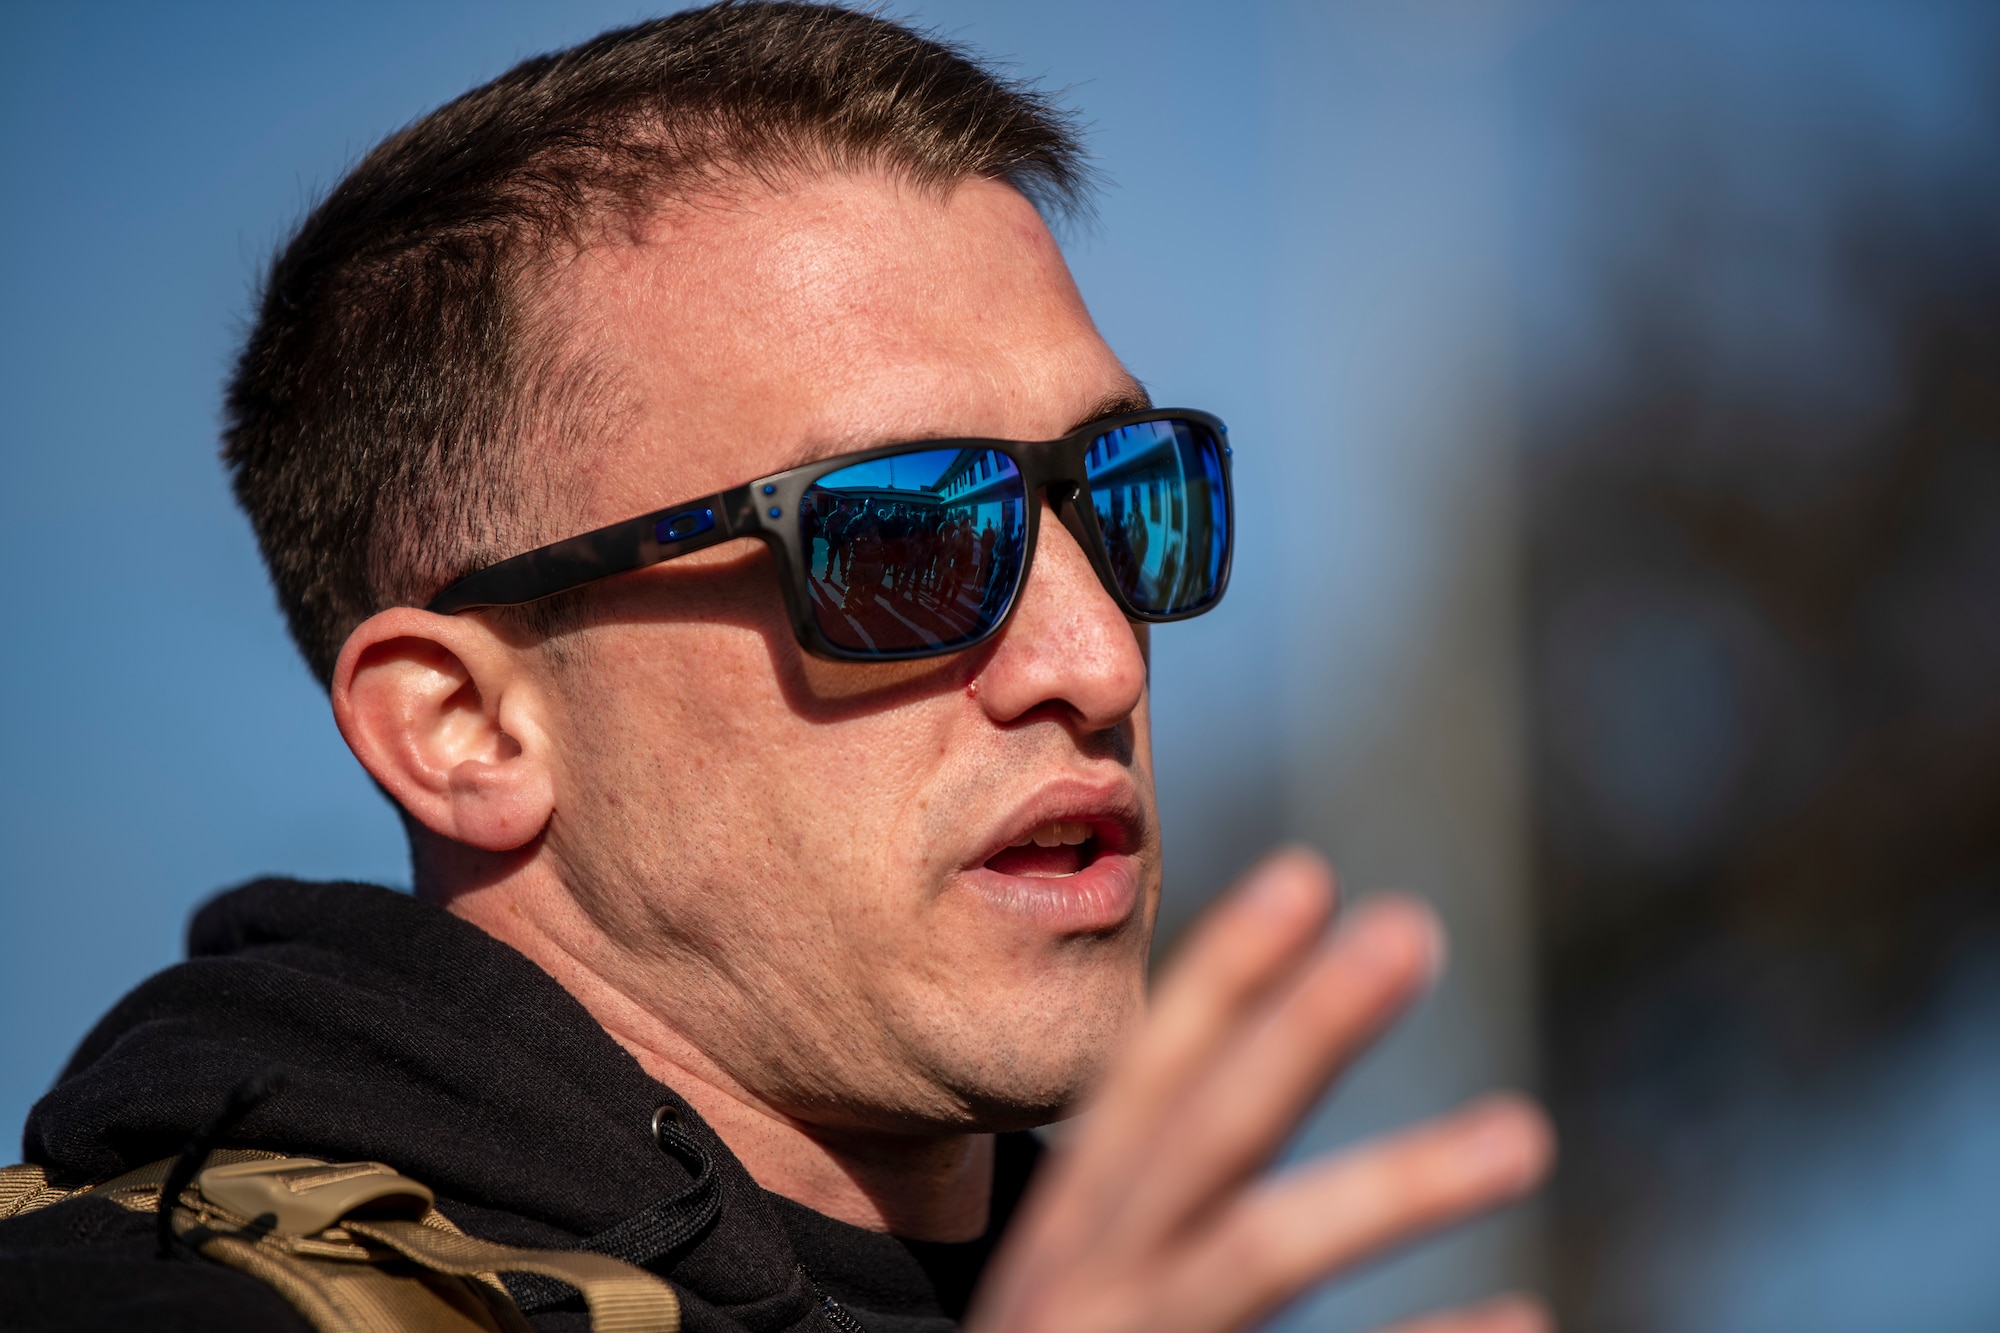 An Airman wearing black rimmed sun glasses is seen talking. The picture was taken very close to him so his head fills the frame.